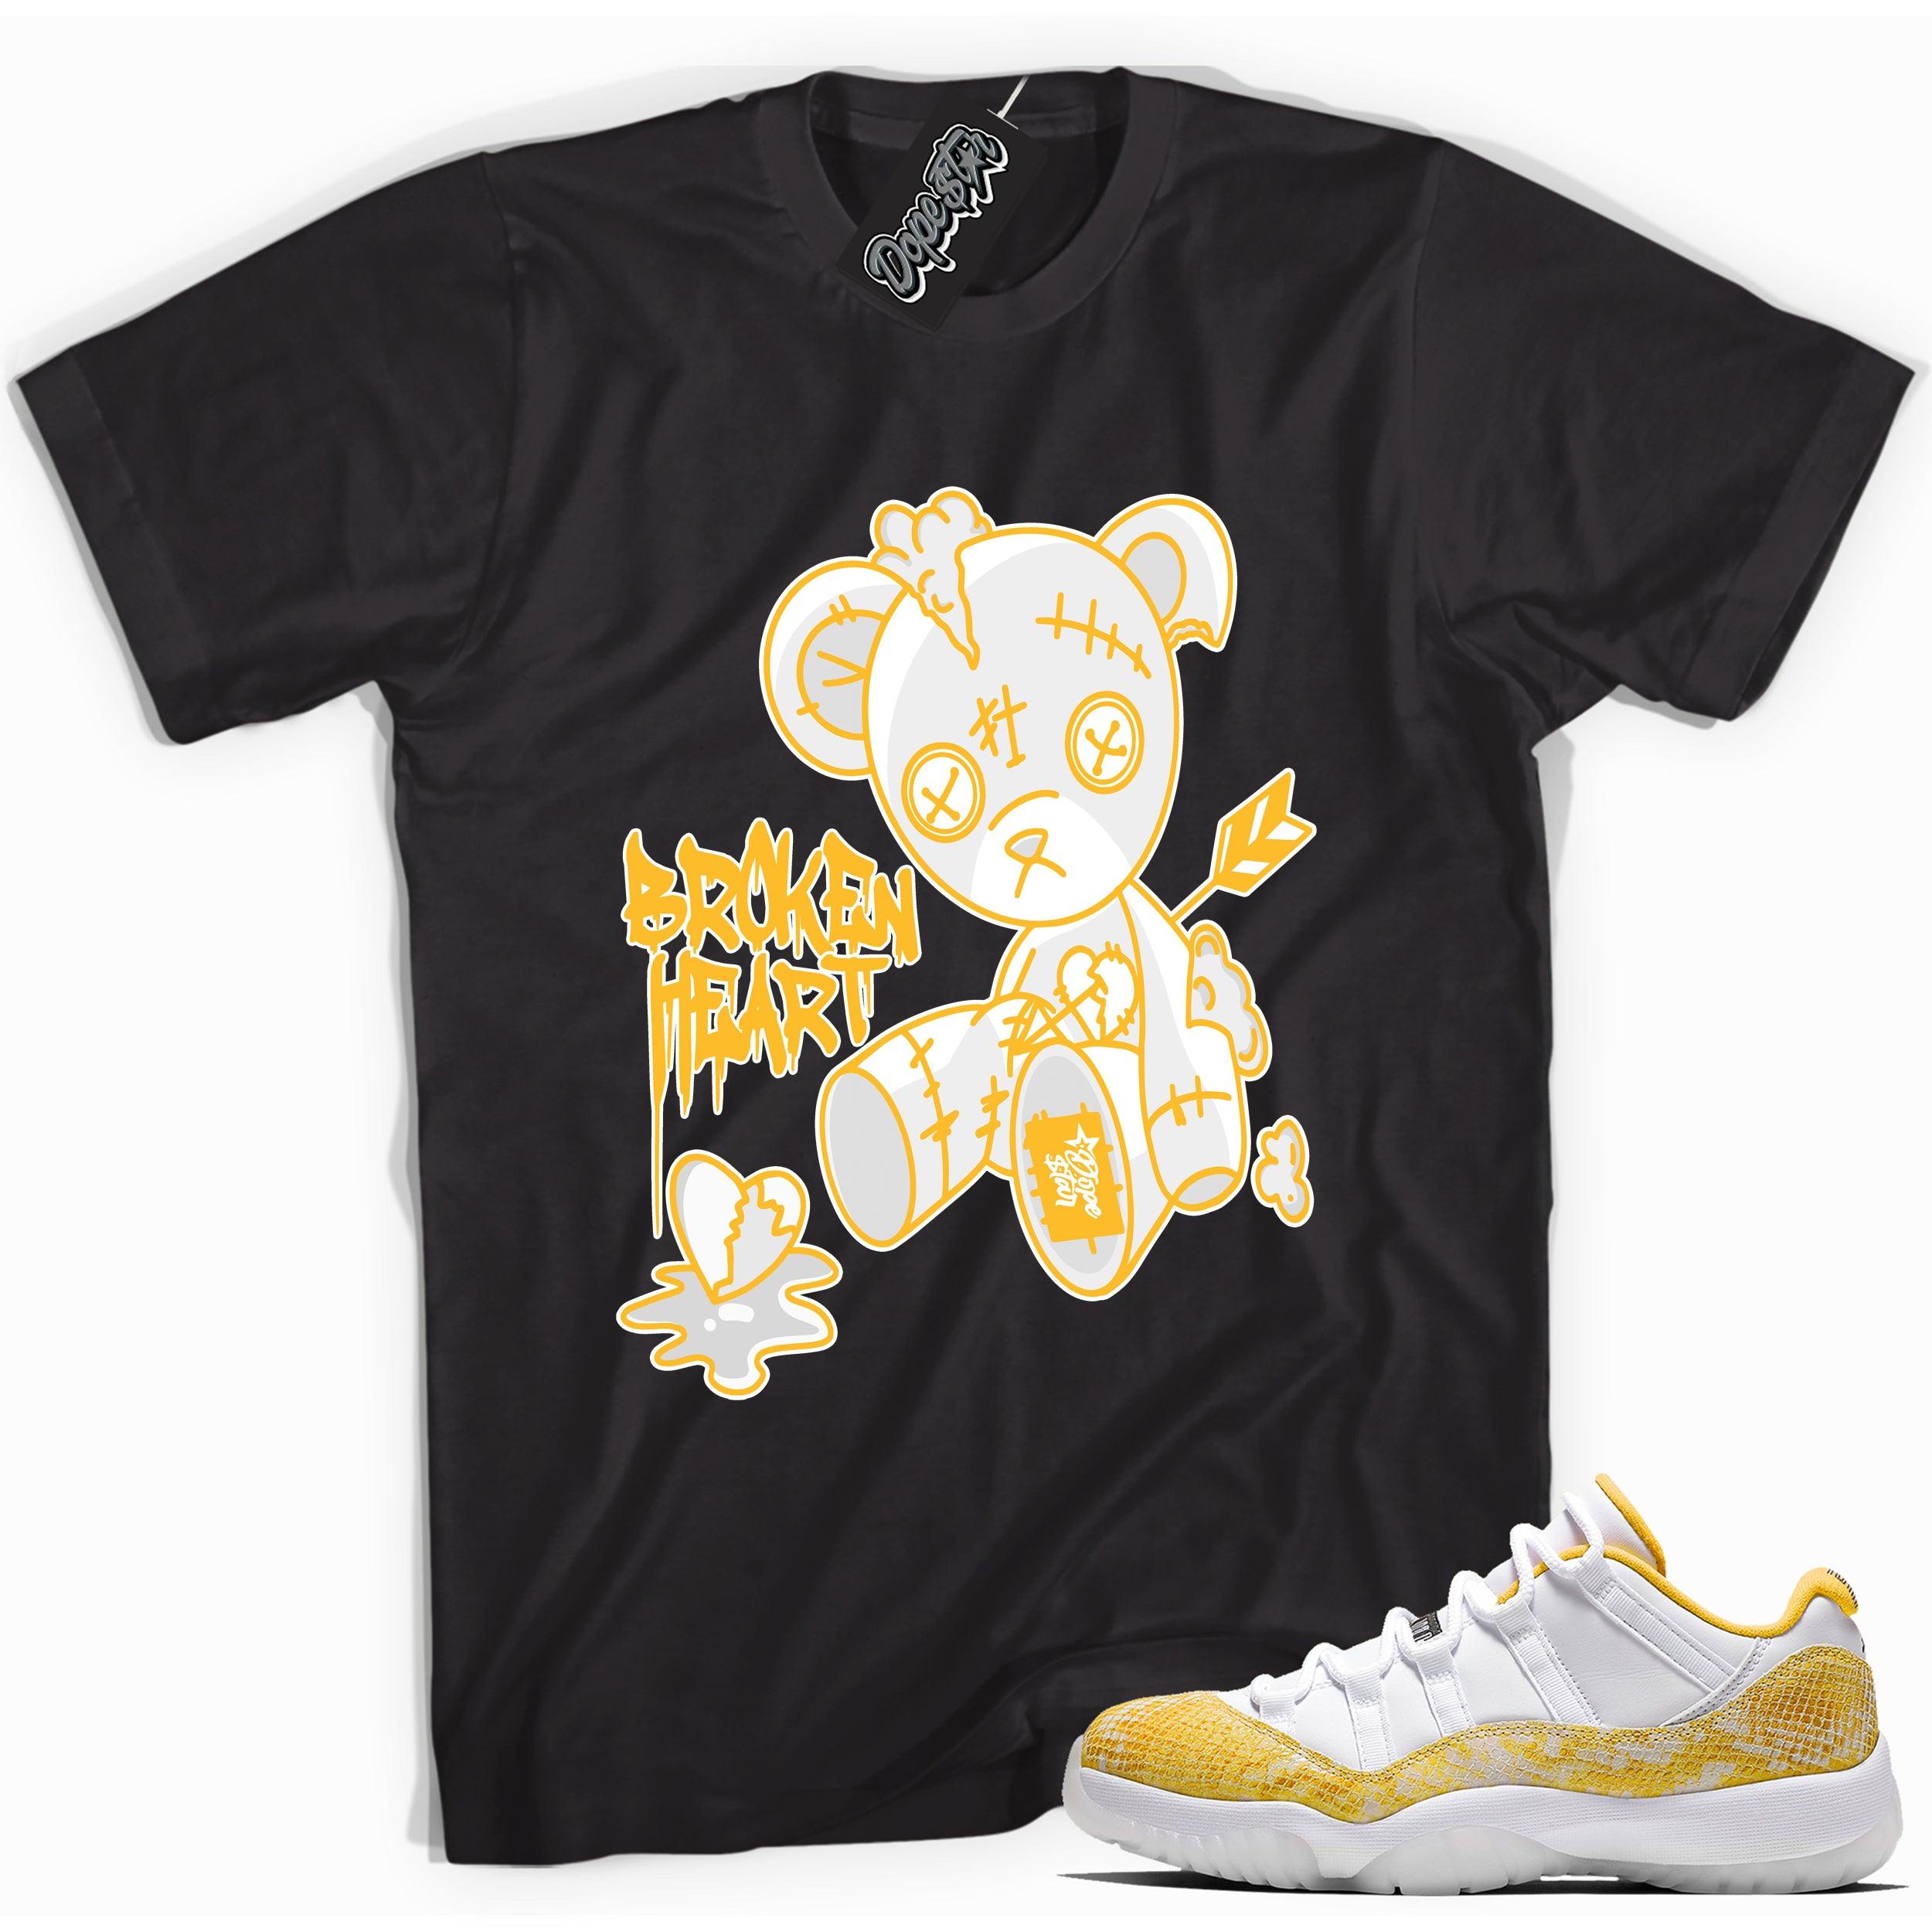 Cool black graphic tee with 'broken heart bear' print, that perfectly matches  Air Jordan 11 Low Yellow Snakeskin sneakers